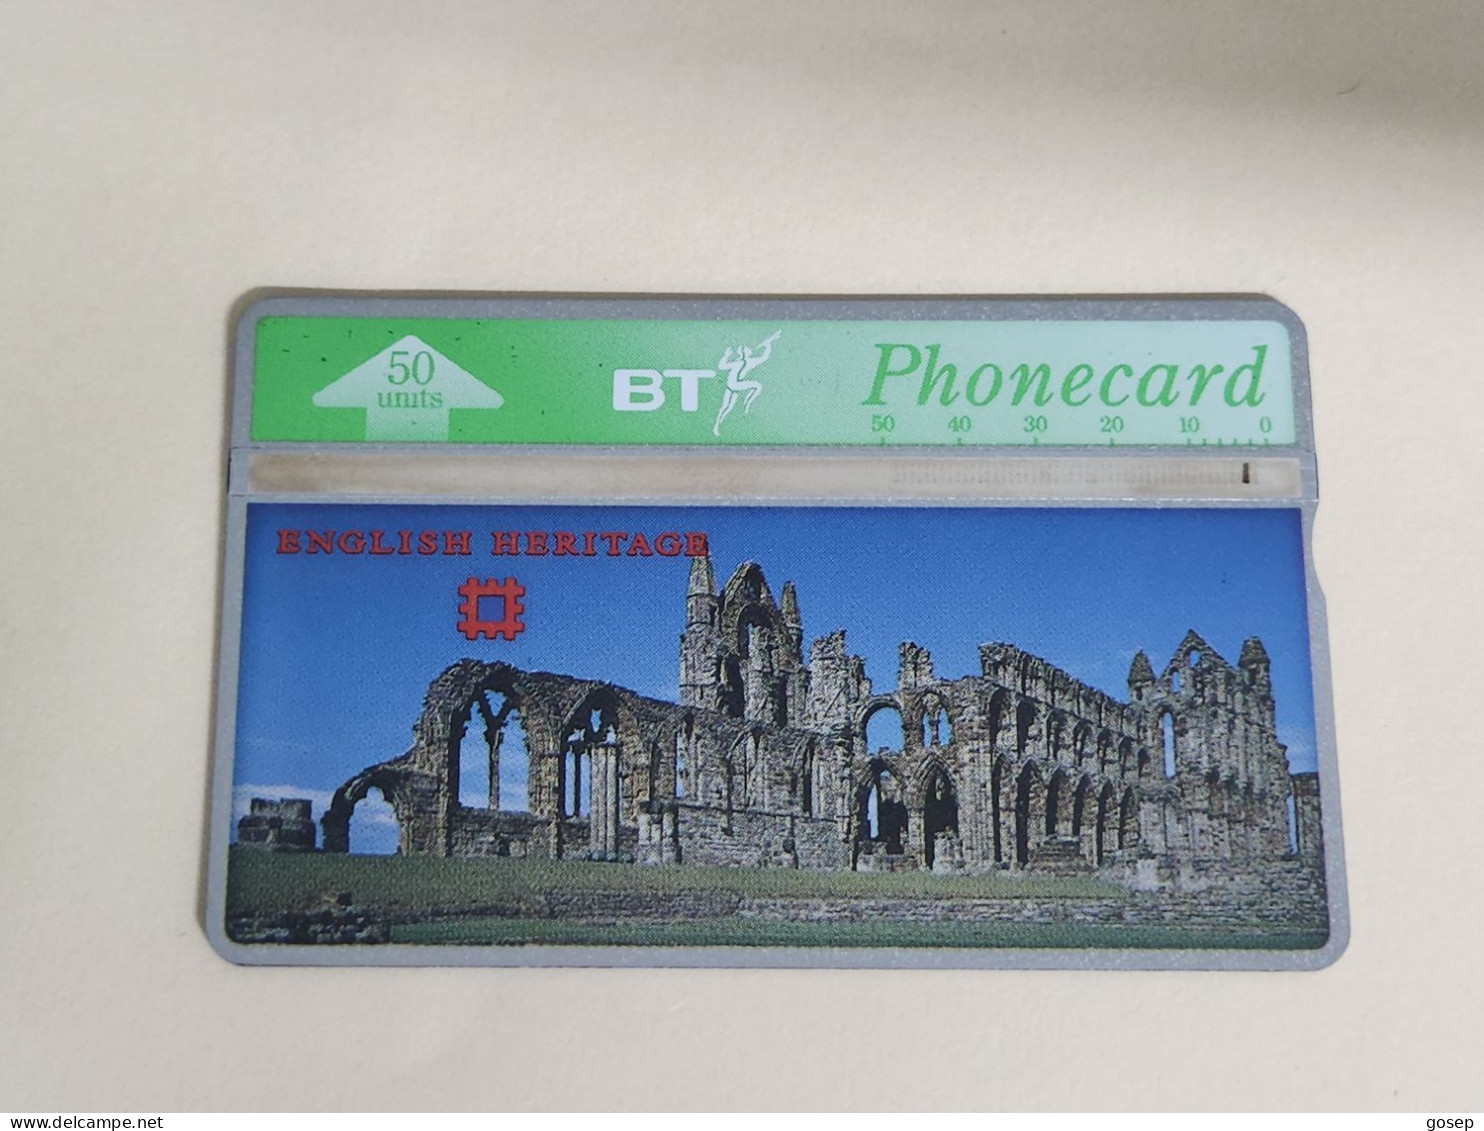 United Kingdom-(BTA112)-HERITAGE-Whitby Abbey-(192)(50units)(547A70177)price Cataloge3.00£-used+1card Prepiad Free - BT Advertising Issues